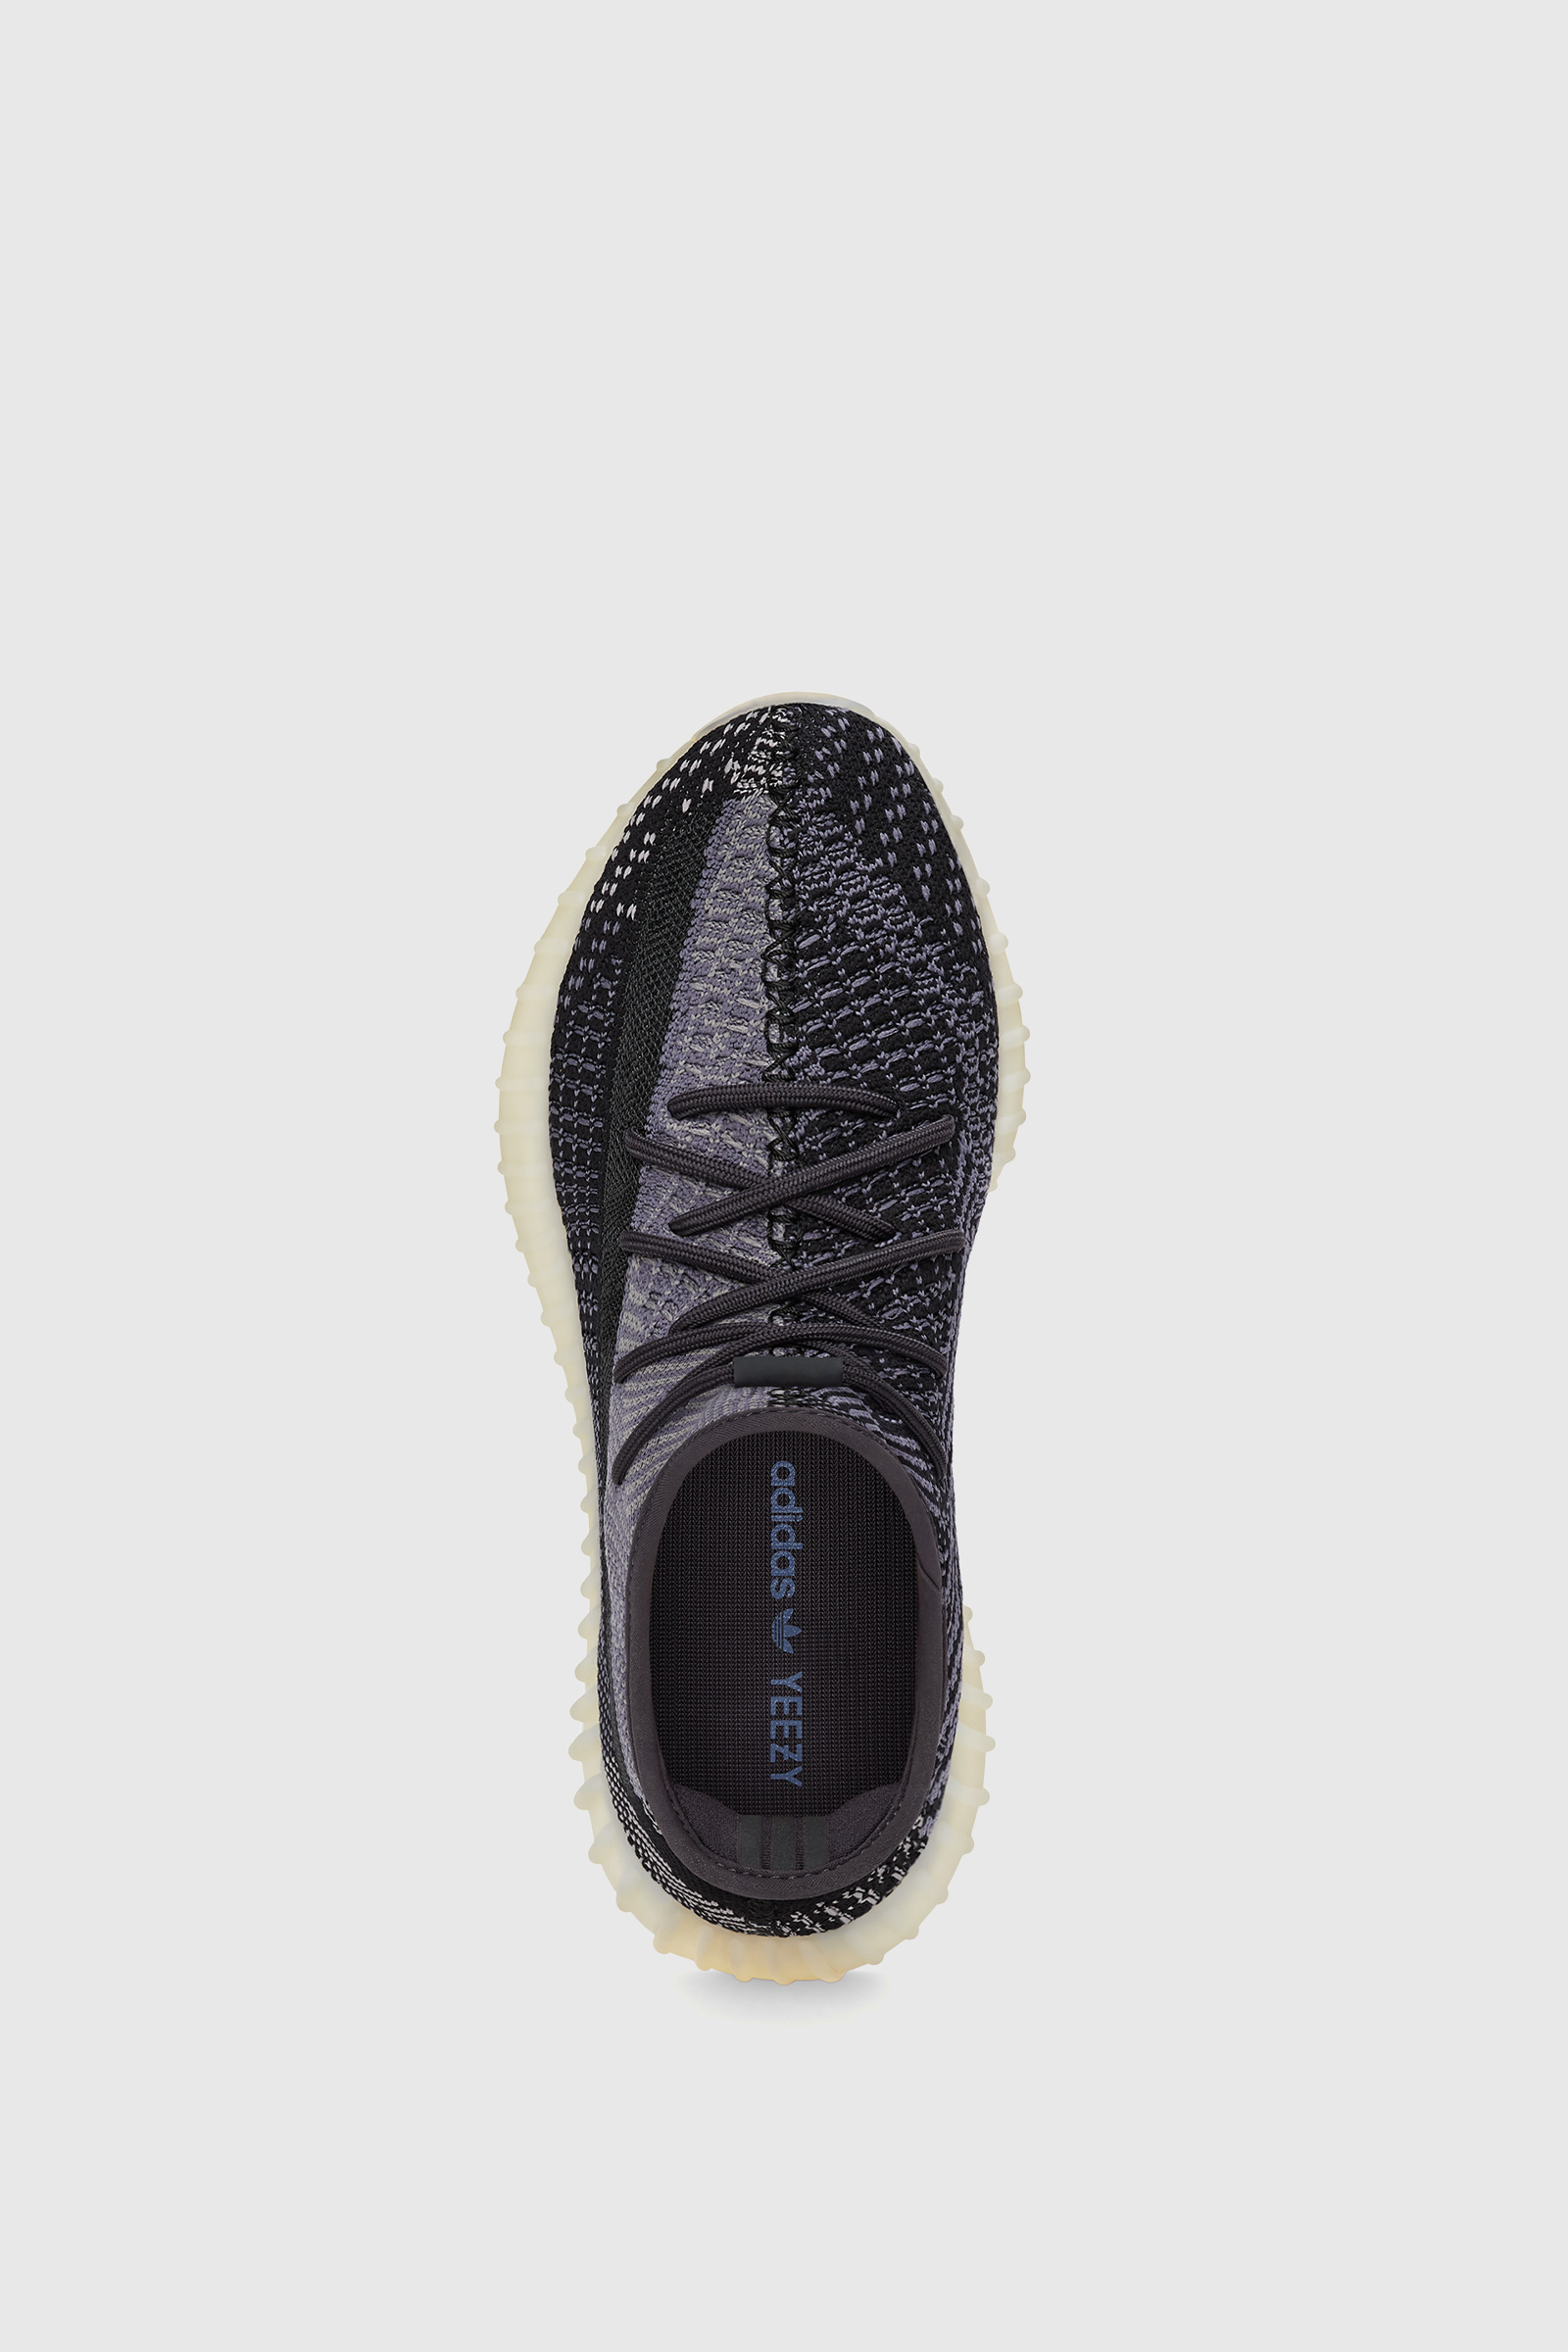 yeezy boost 350 carbon